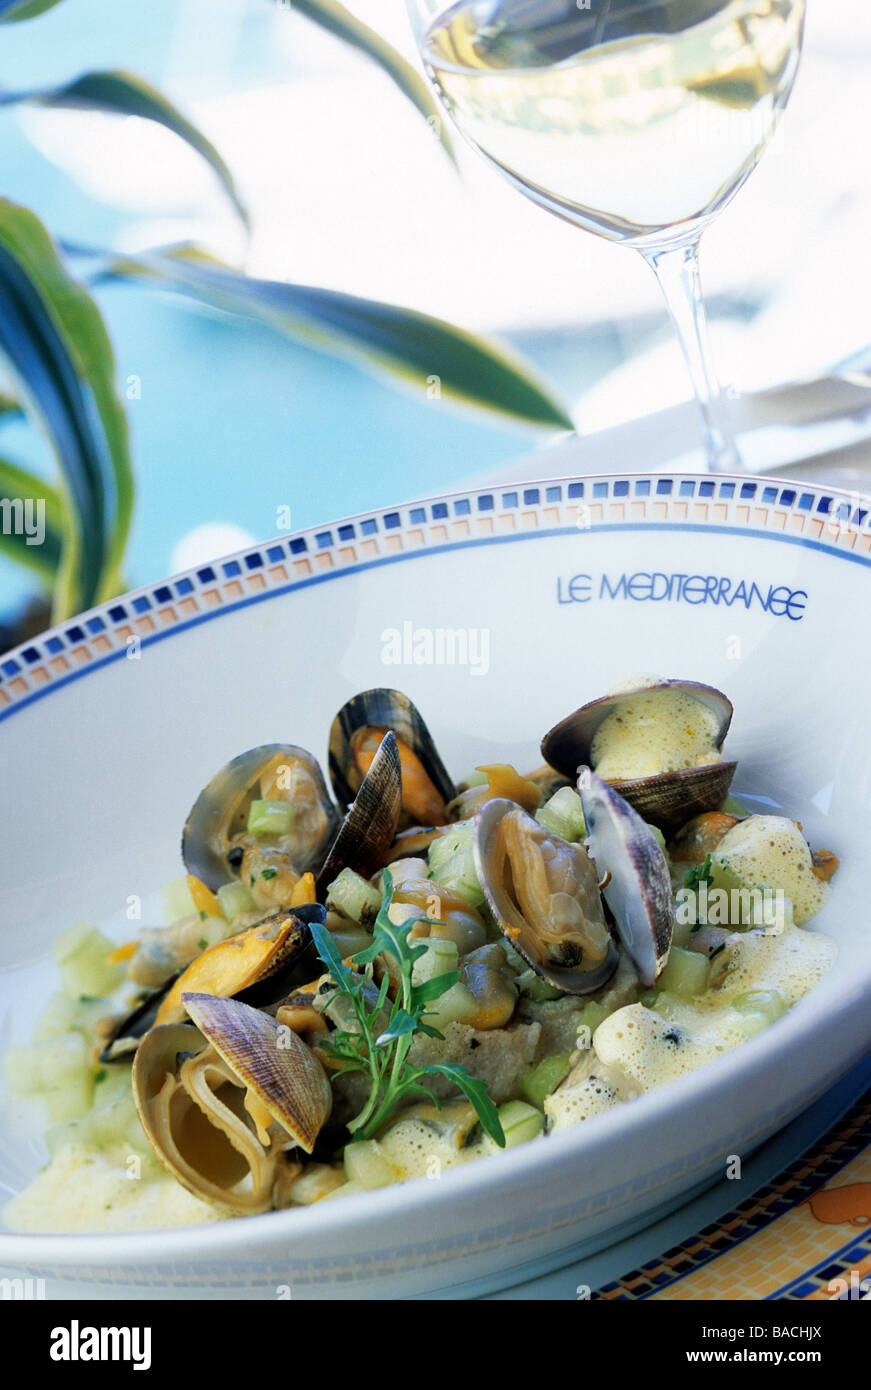 France, Alpes Maritimes, Cannes, buckwheat polenta of shellfish recipe by Jean-Jacques Martin Chef of The Mediterranean Stock Photo